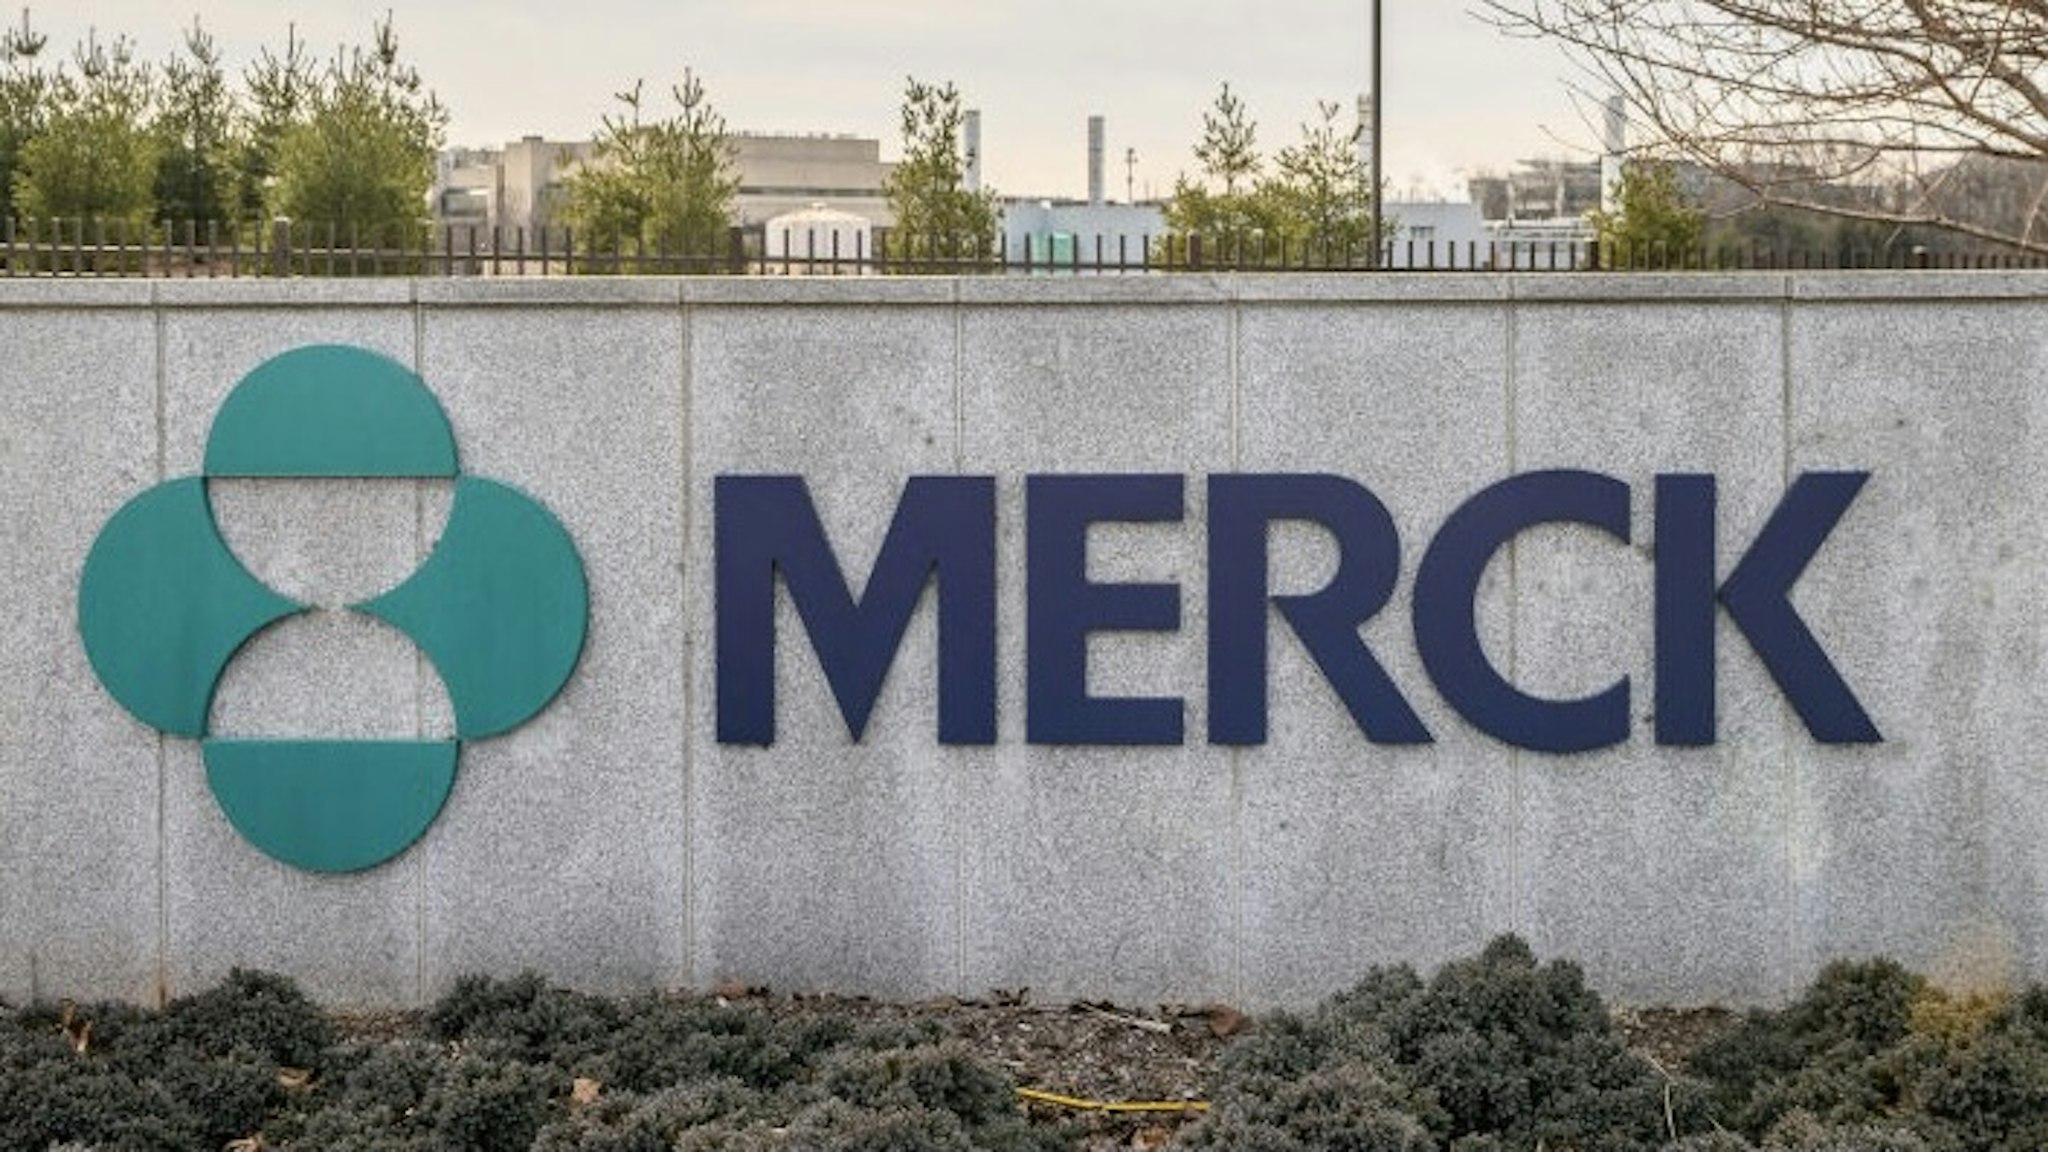 Signage outside Merck &amp; Co. headquarters in Kenilworth, New Jersey, U.S., on Monday, Jan. 25, 2021. Merck &amp; Co. is discontinuing development of its two experimental Covid-19 vaccines after early trial data showed they failed to generate immune responses comparable to a natural infection or existing vaccines. Photographer: Christopher Occhicone/Bloomberg